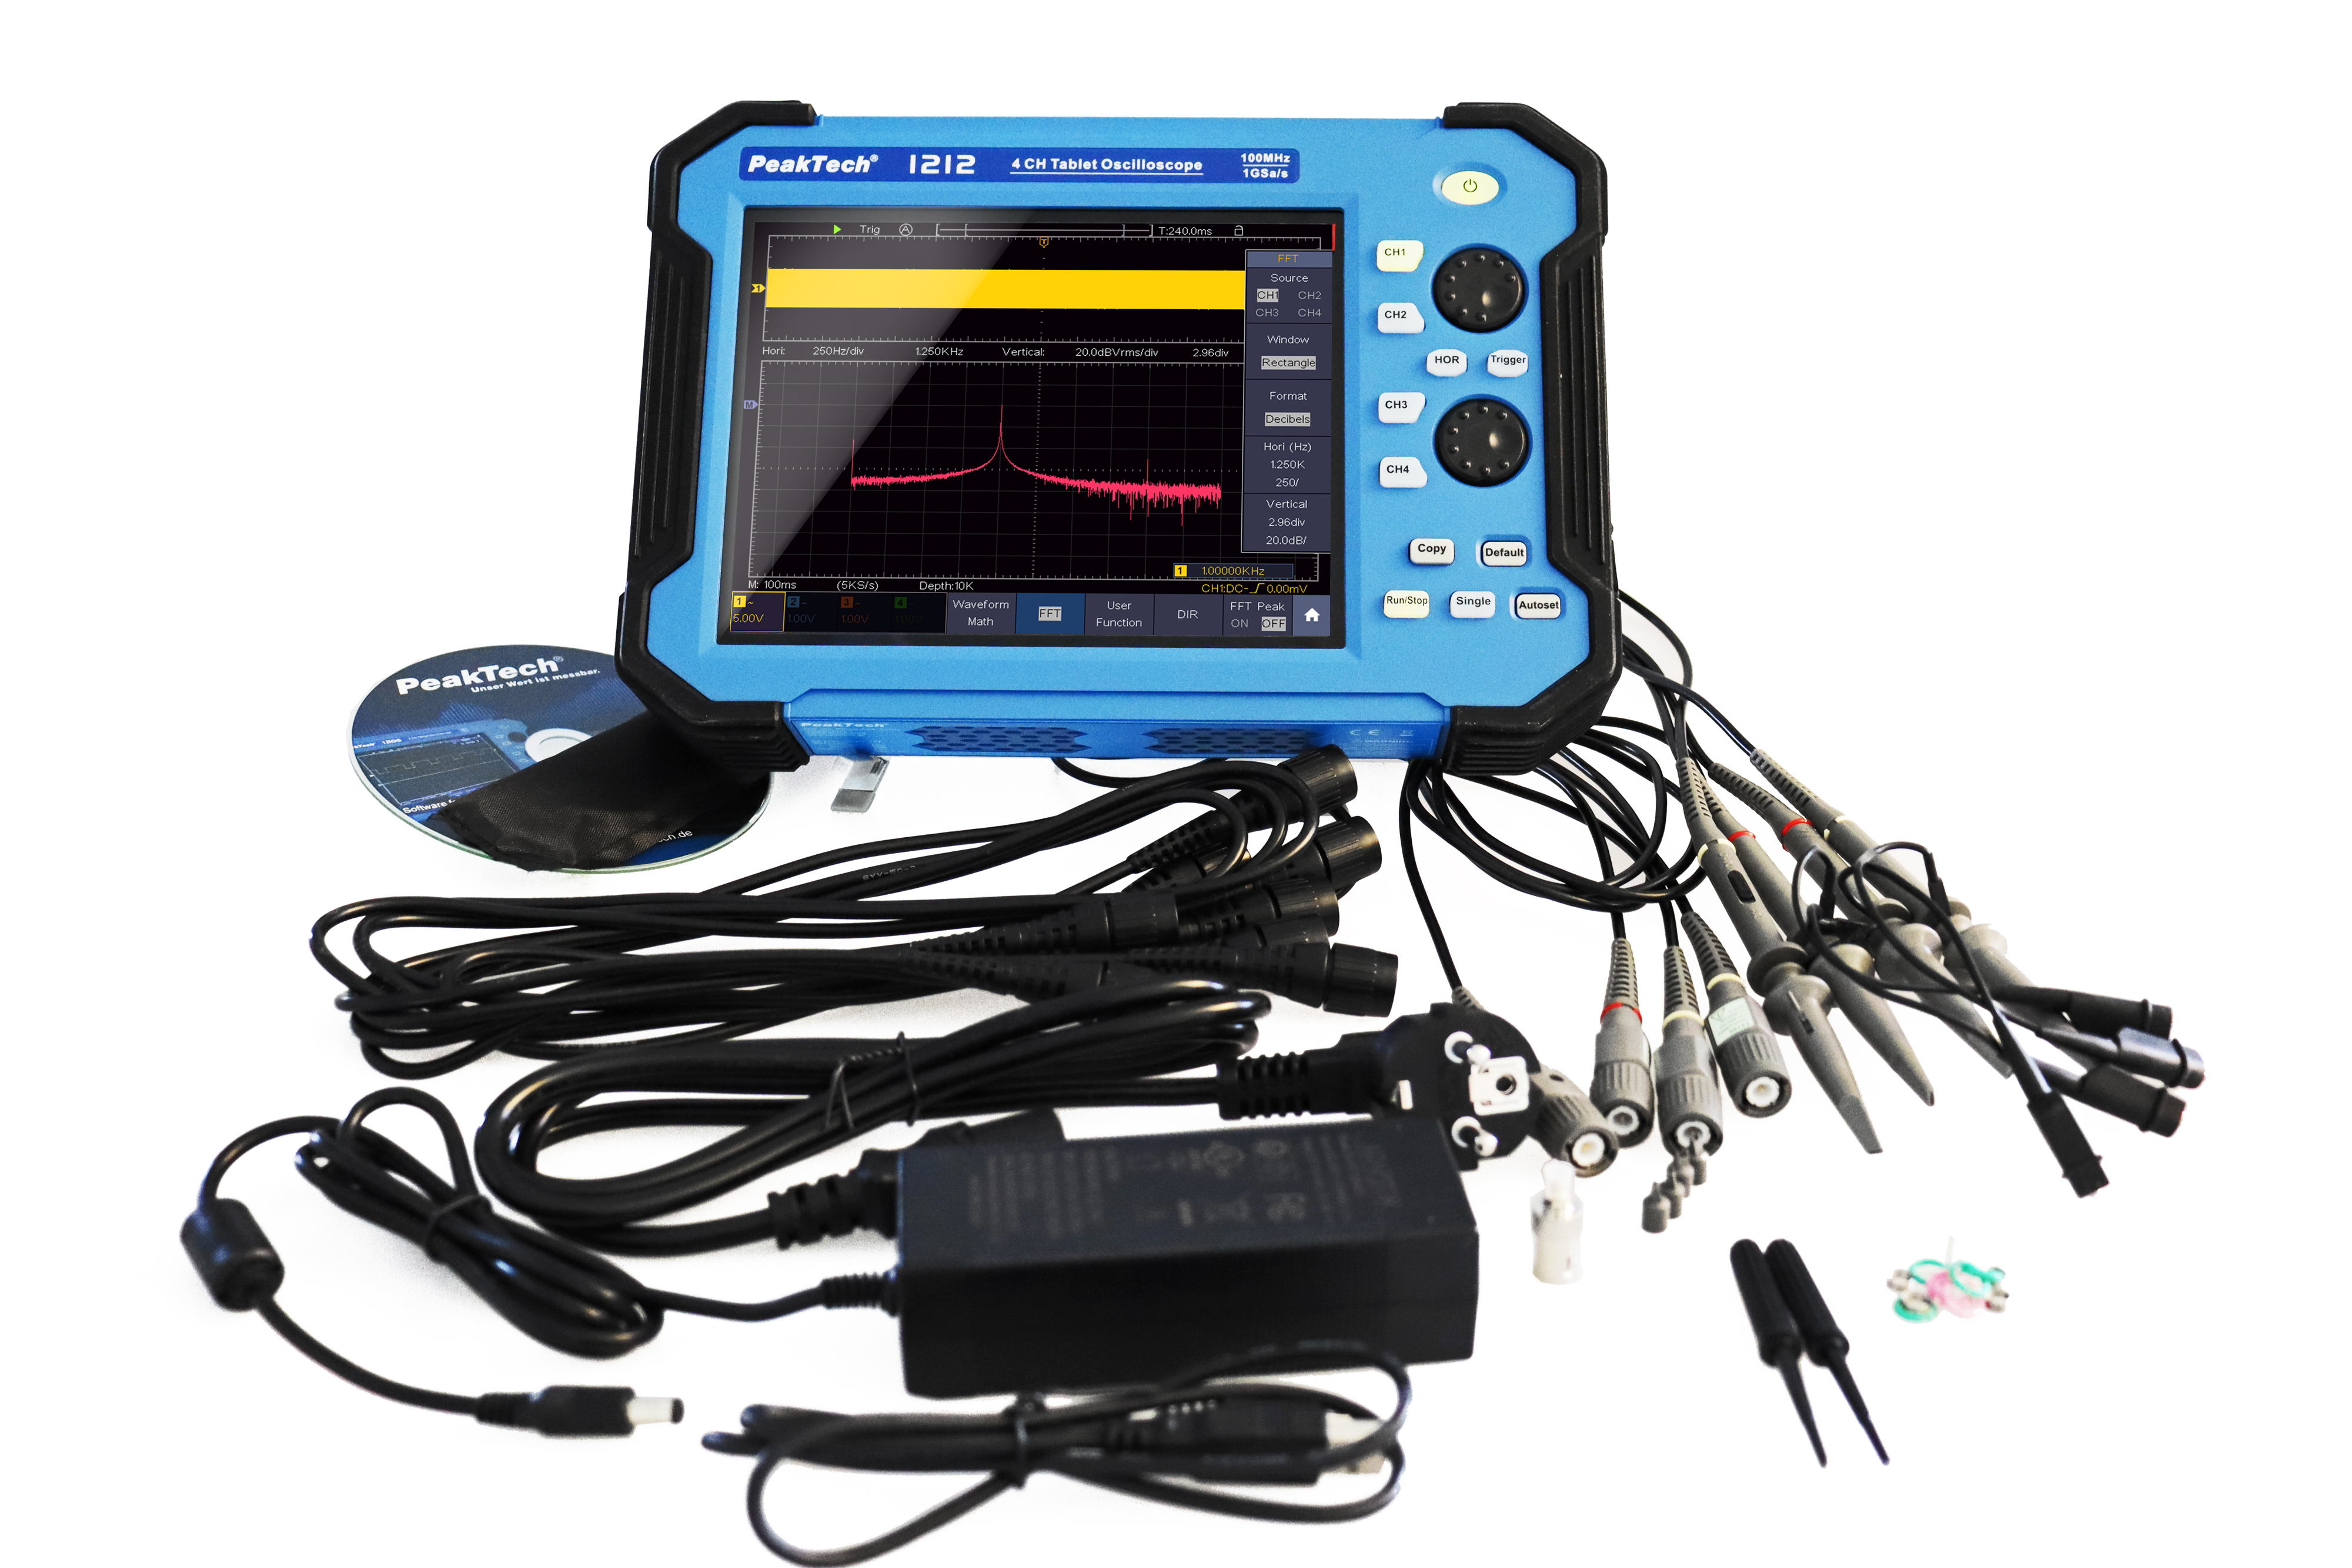 «PeakTech® P 1212» 100 MHz / 4 CH, 1 GS/s tablet Oscilloscope